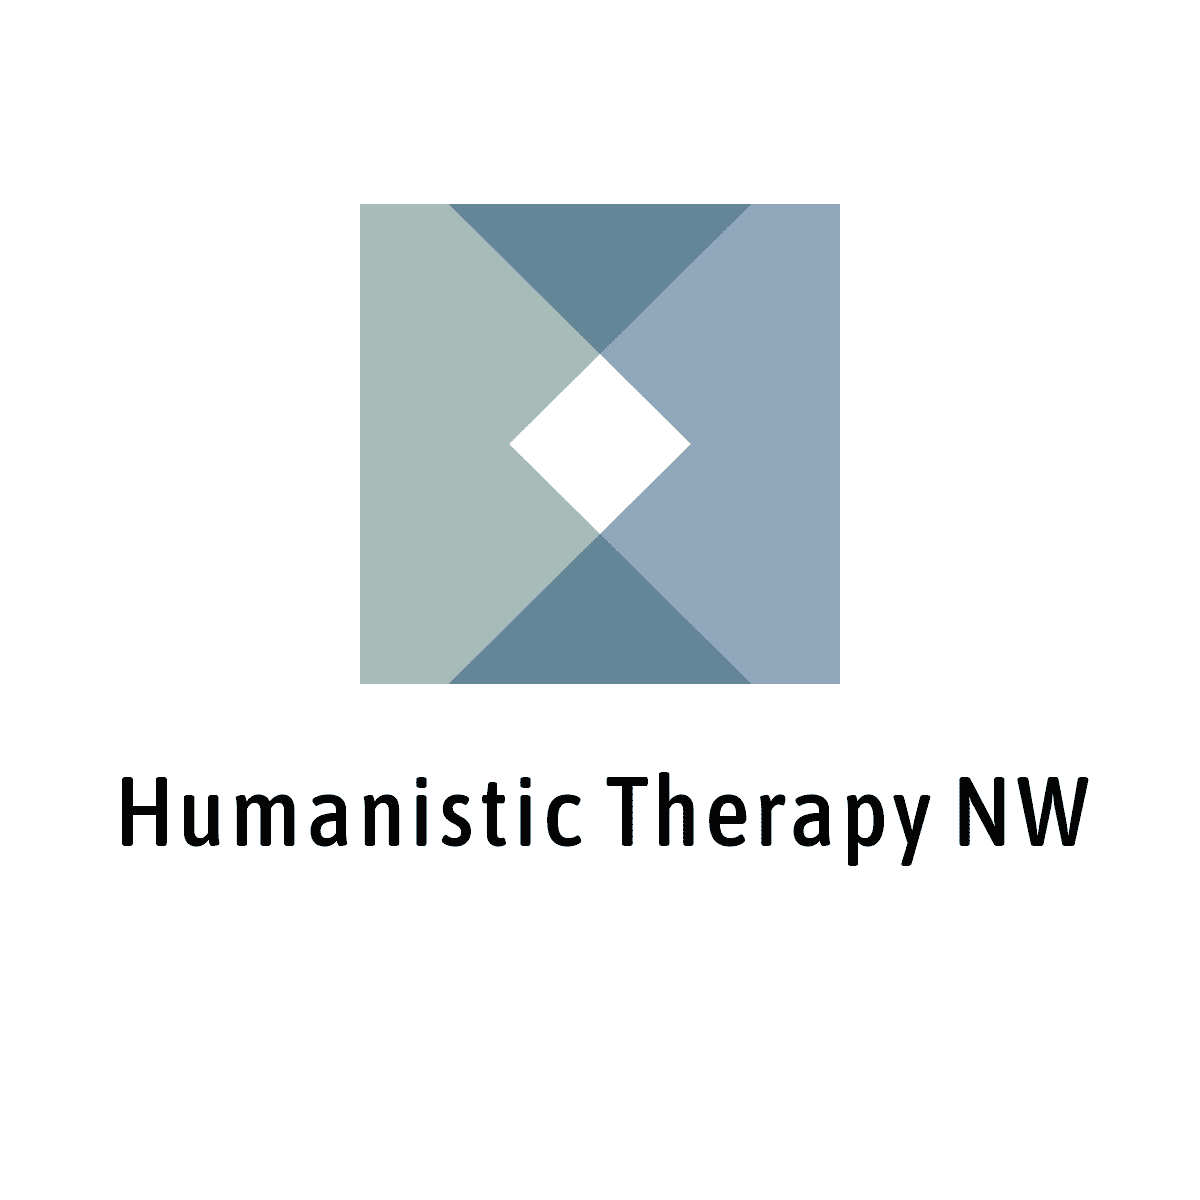 Humanistic Therapy NW